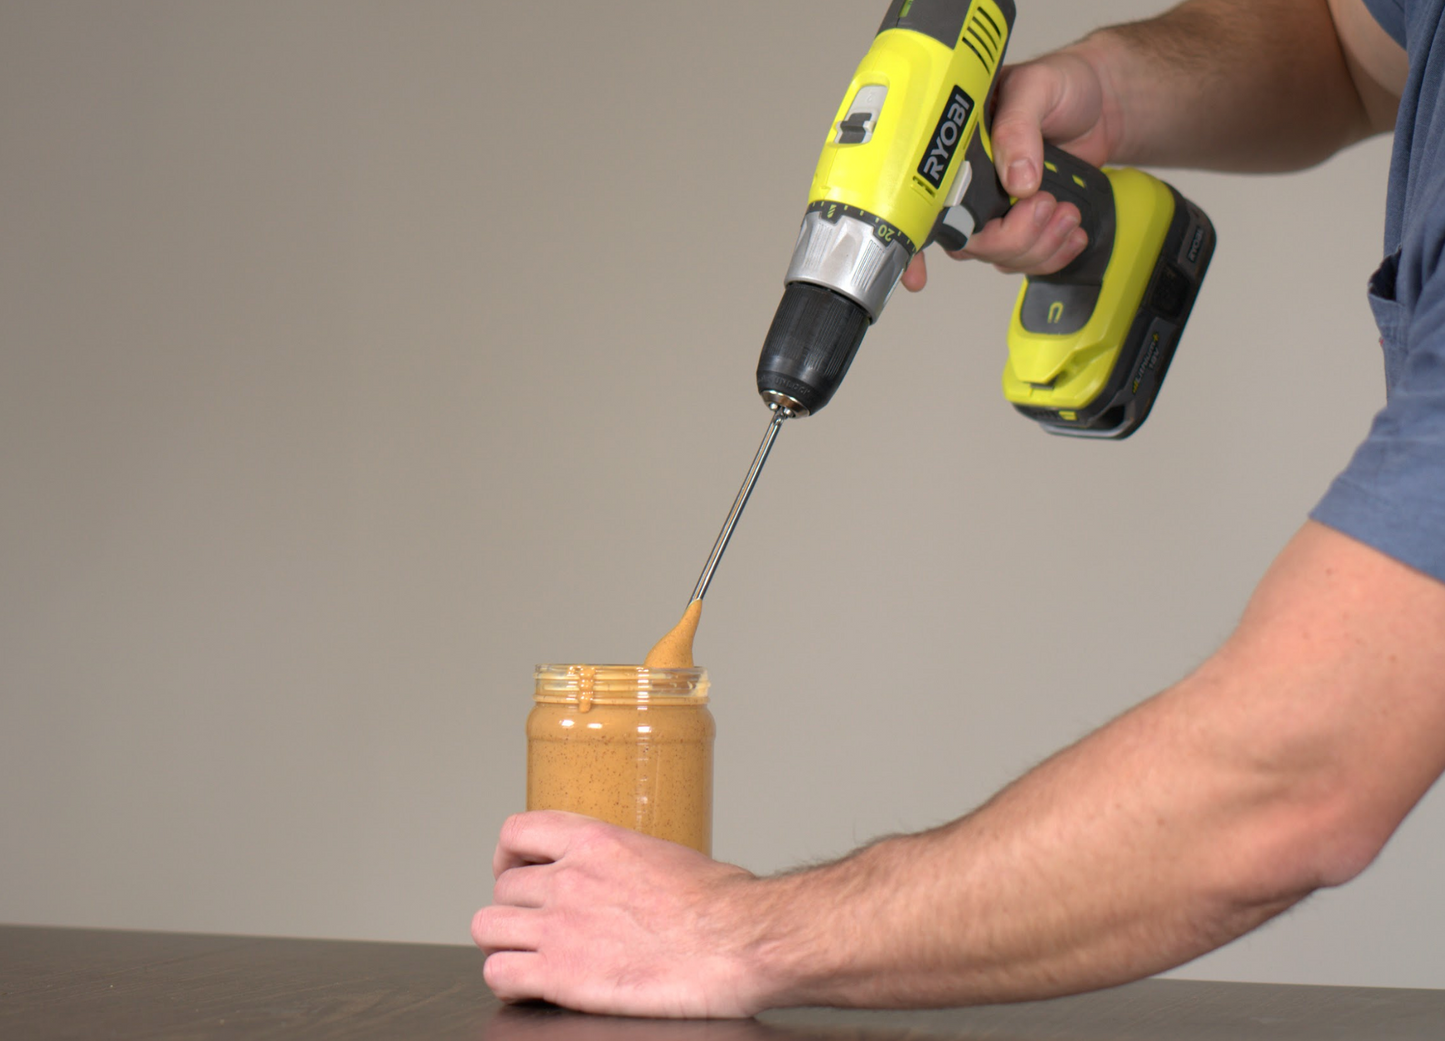 NutBustir natural nut butter mixer attaches to drills and hand mixers to  blend oils » Gadget Flow